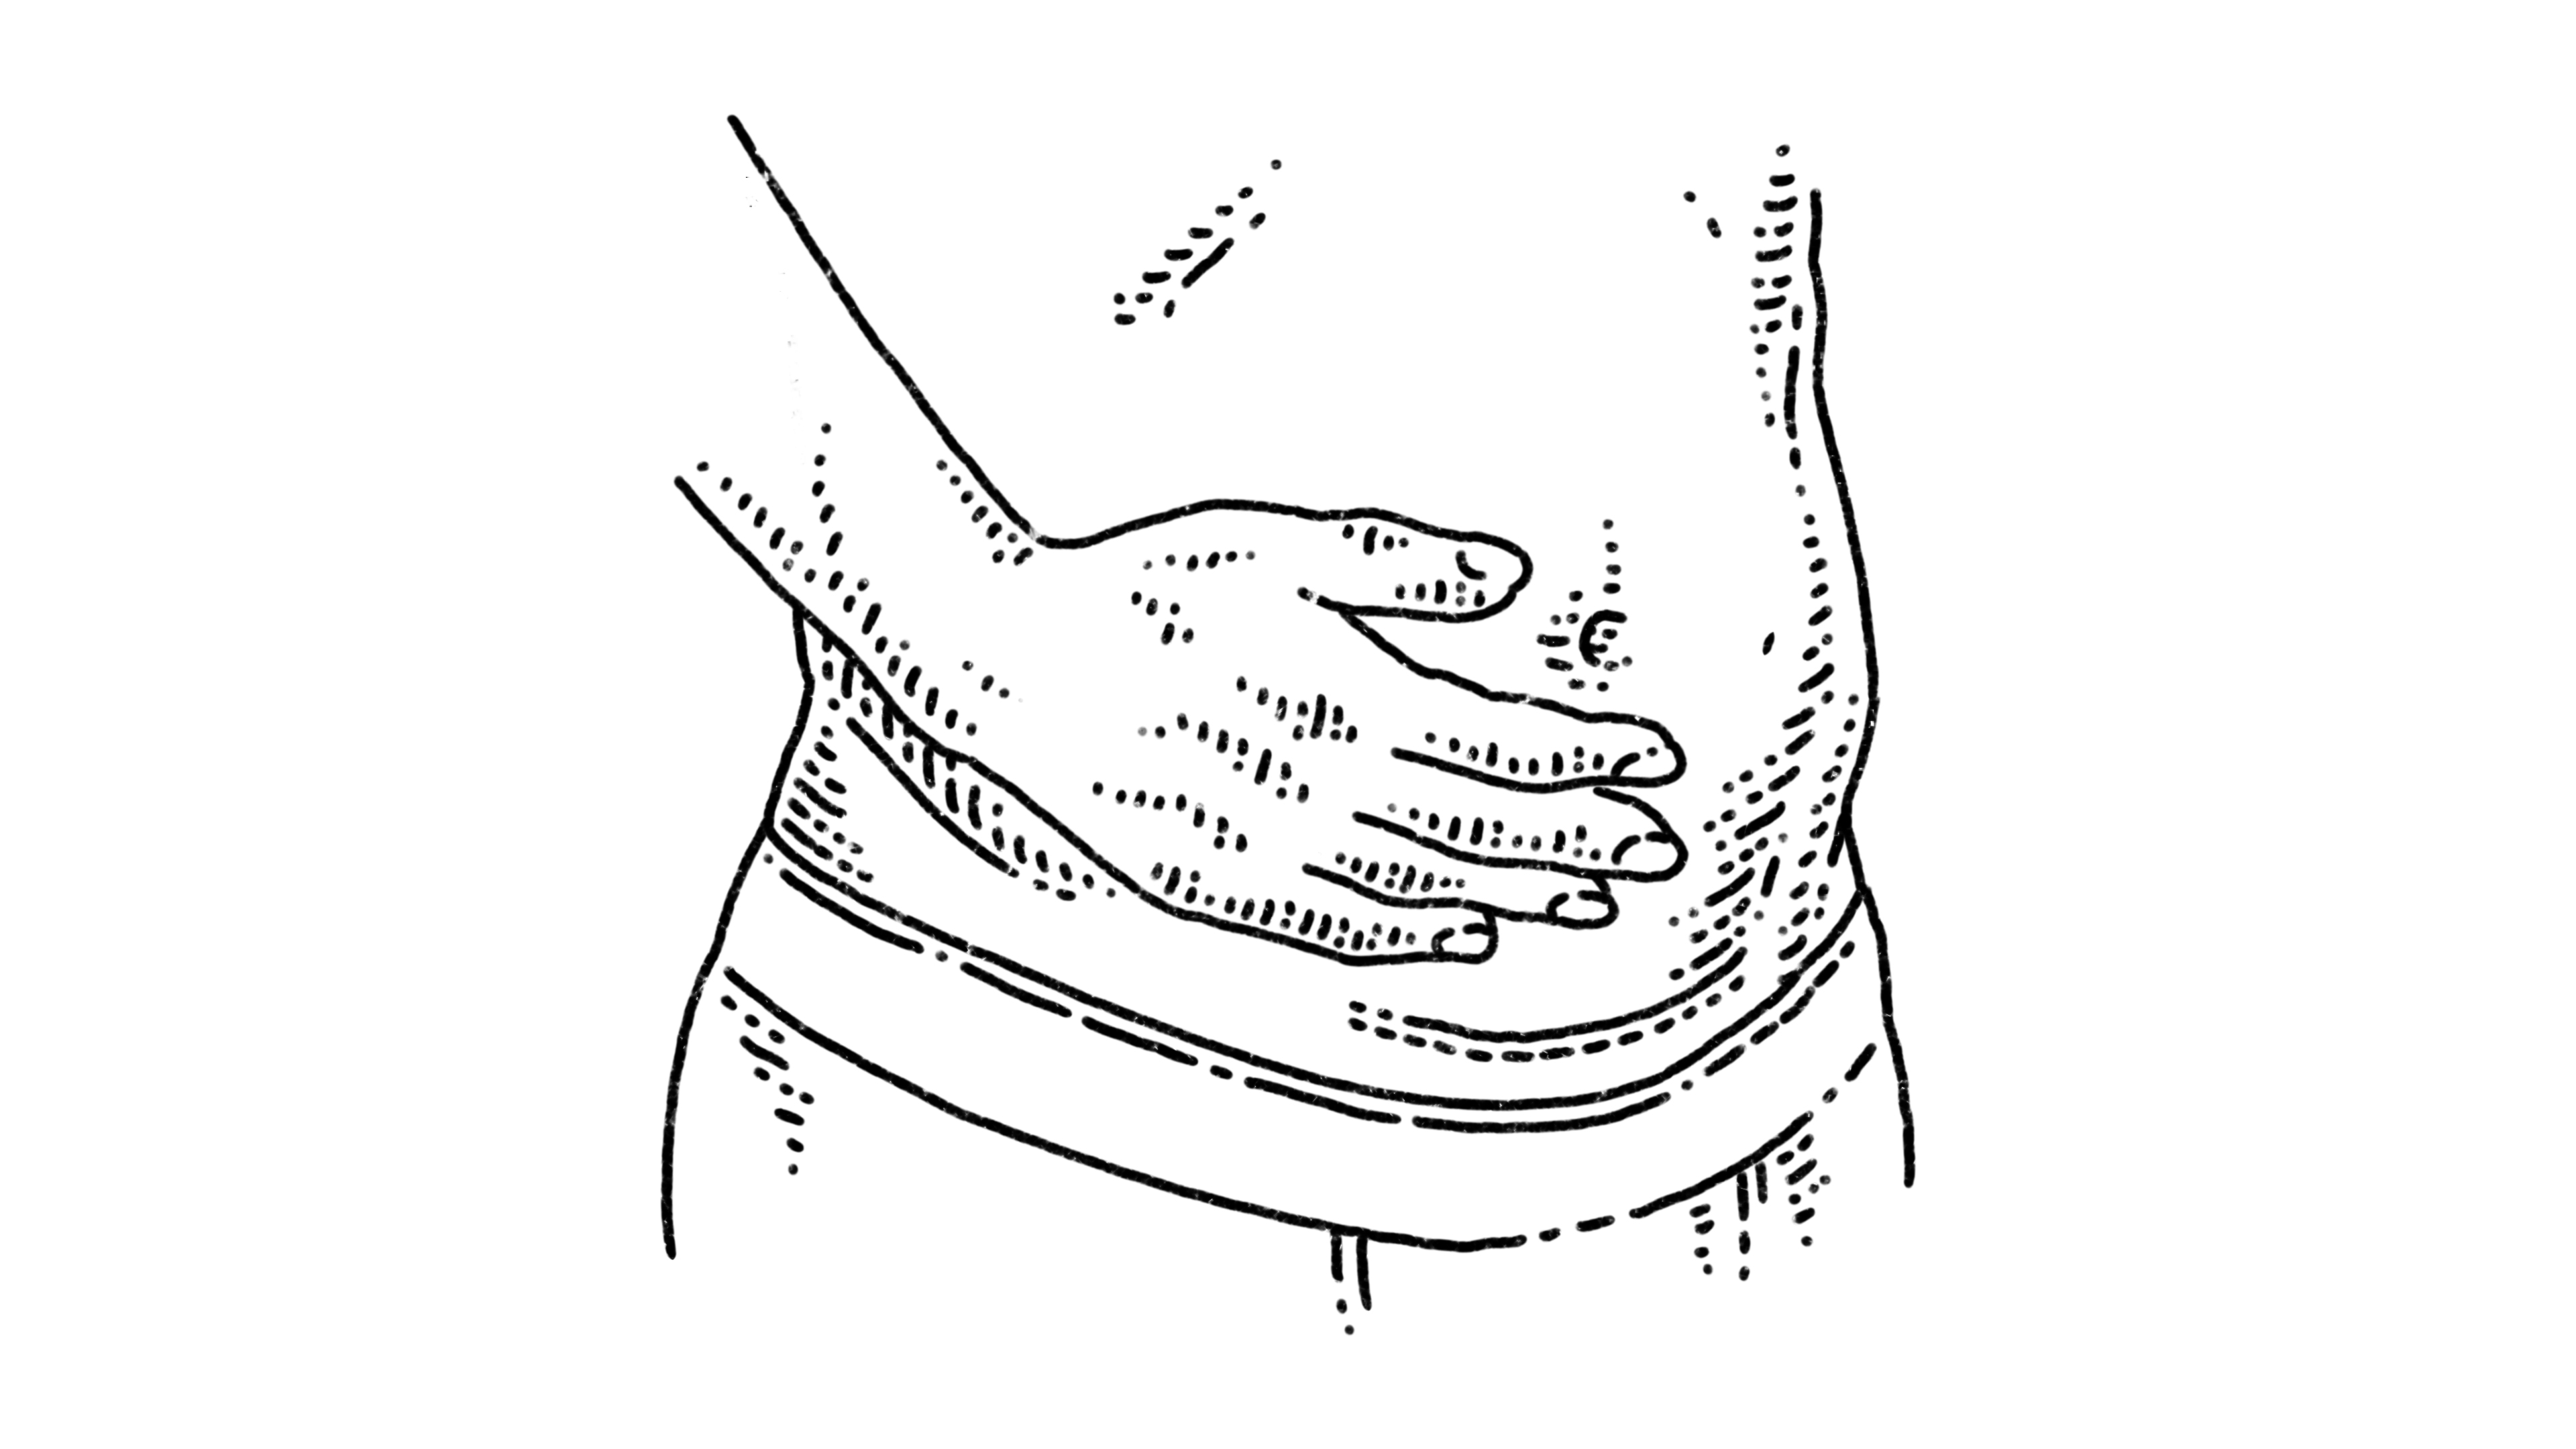 A hand placed over a lower abdomen with hysterectomy scar. 